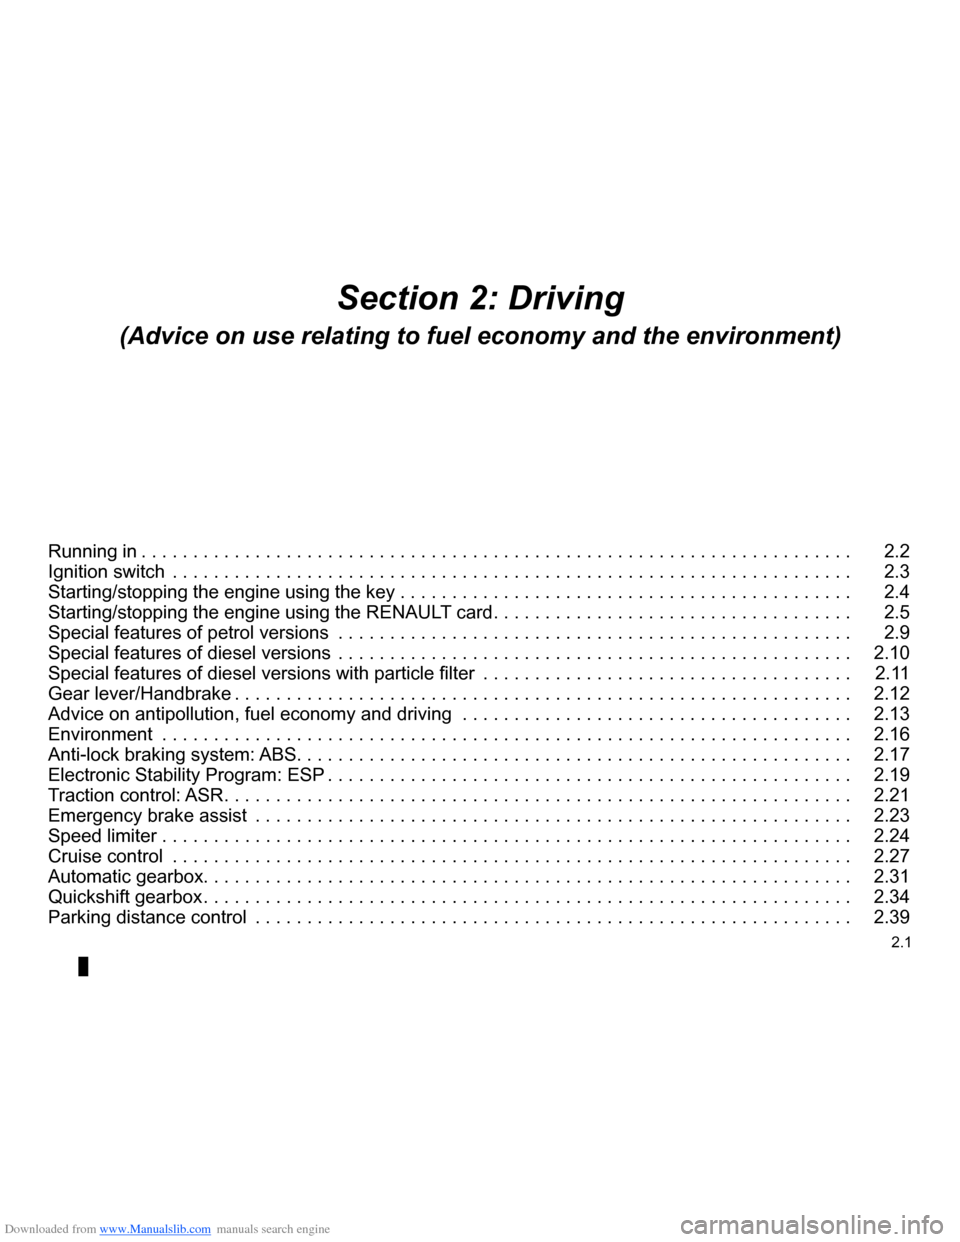 RENAULT CLIO 2009 X85 / 3.G User Guide Downloaded from www.Manualslib.com manuals search engine 
2.1
ENG_UD14665_4Sommaire 2 (X85 - B85 - C85 - S85 - K85 - Renault)ENG_NU_853-3_BCSK85_Renault_2
Section 2: Driving
(Advice on use relating to